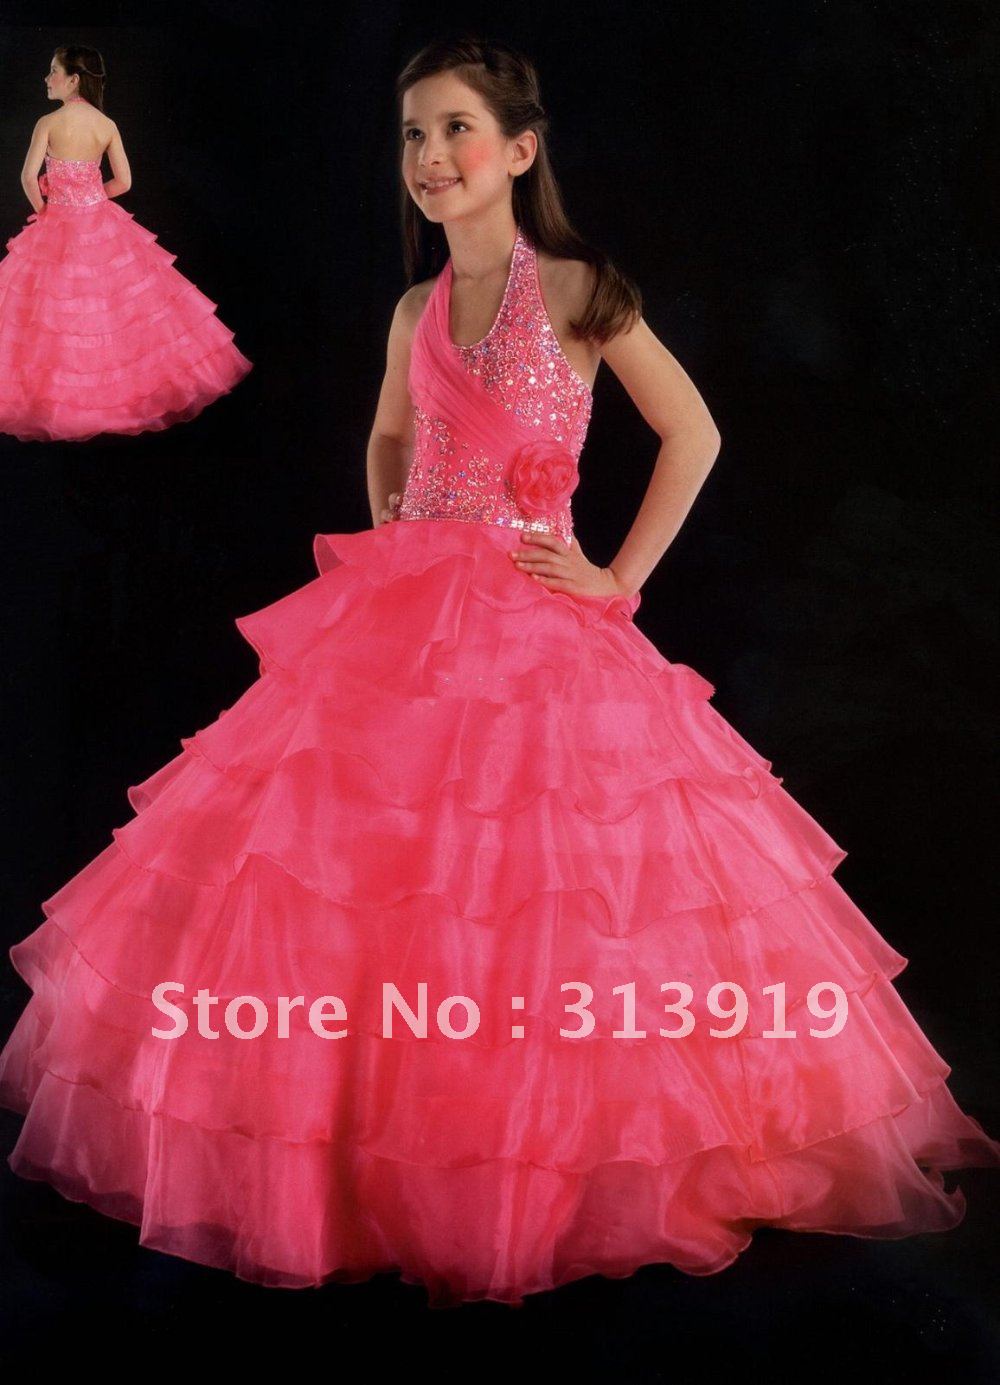 free shipping 2012 new style girl pageant dress long